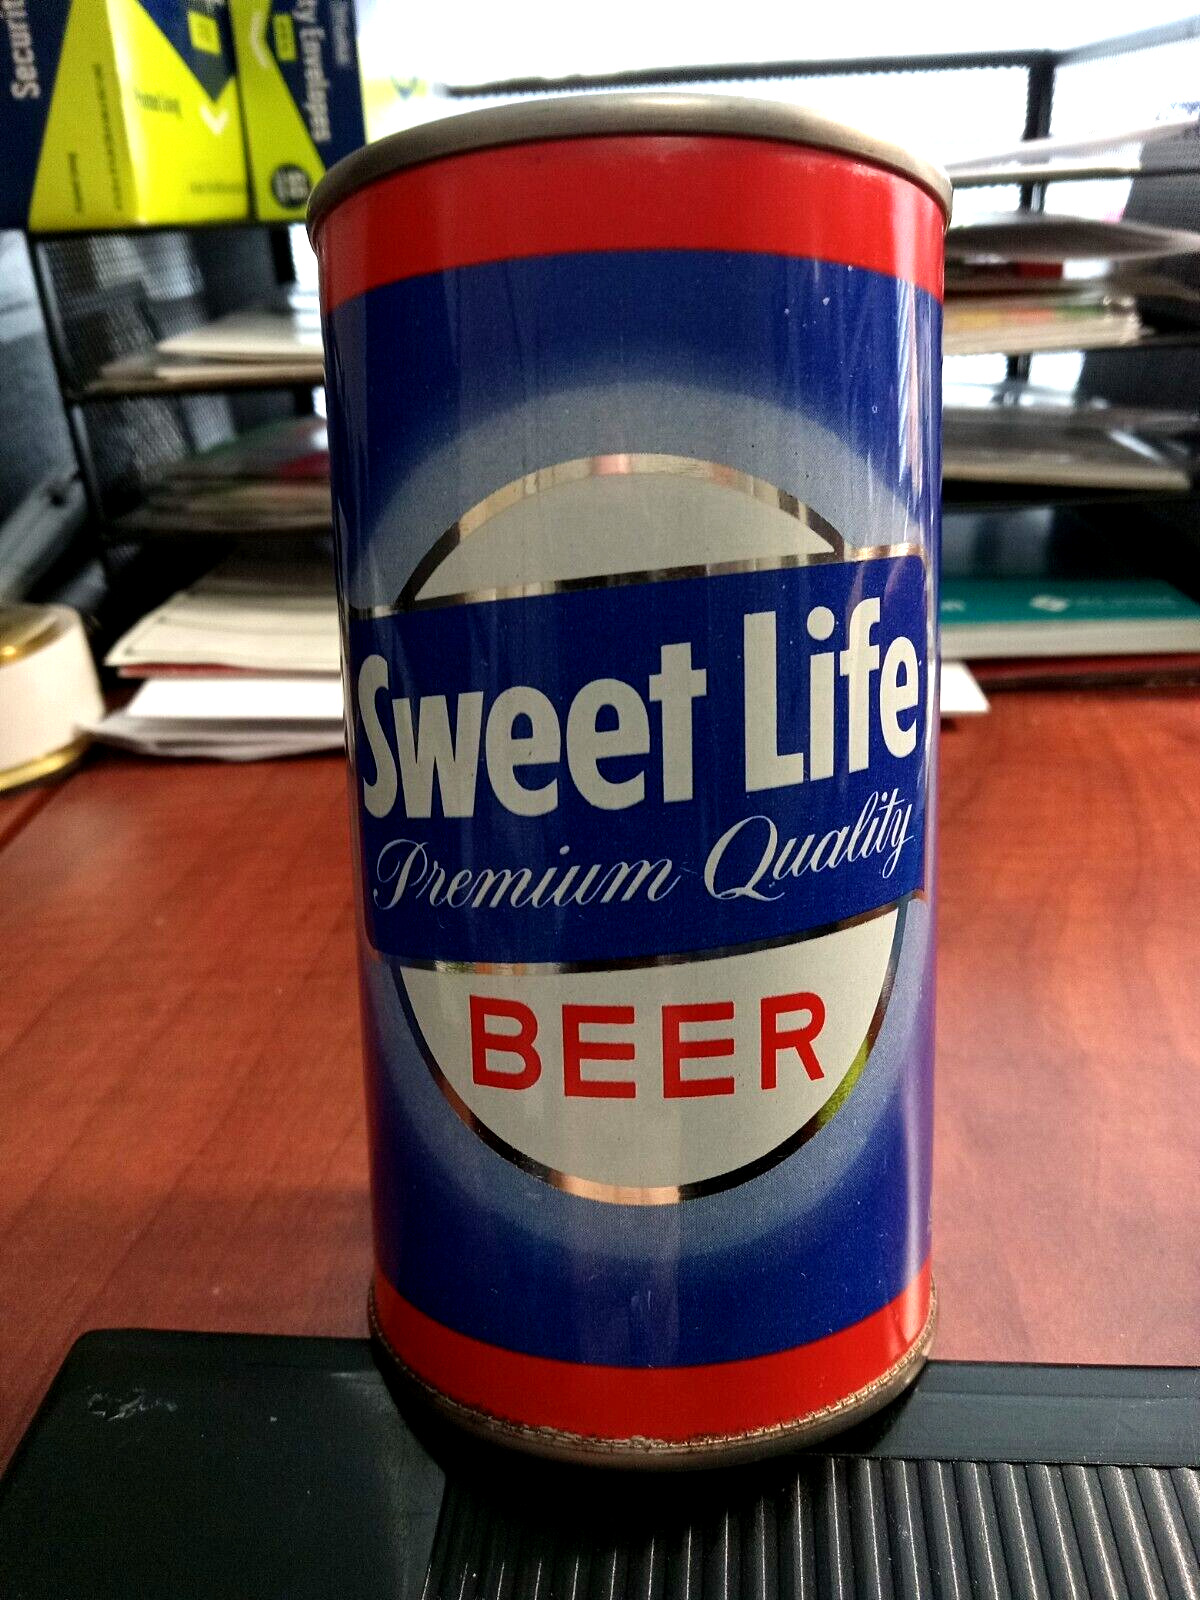 Sweet Life Premium Quality Flat Top Beer Can, Cumberland, MD